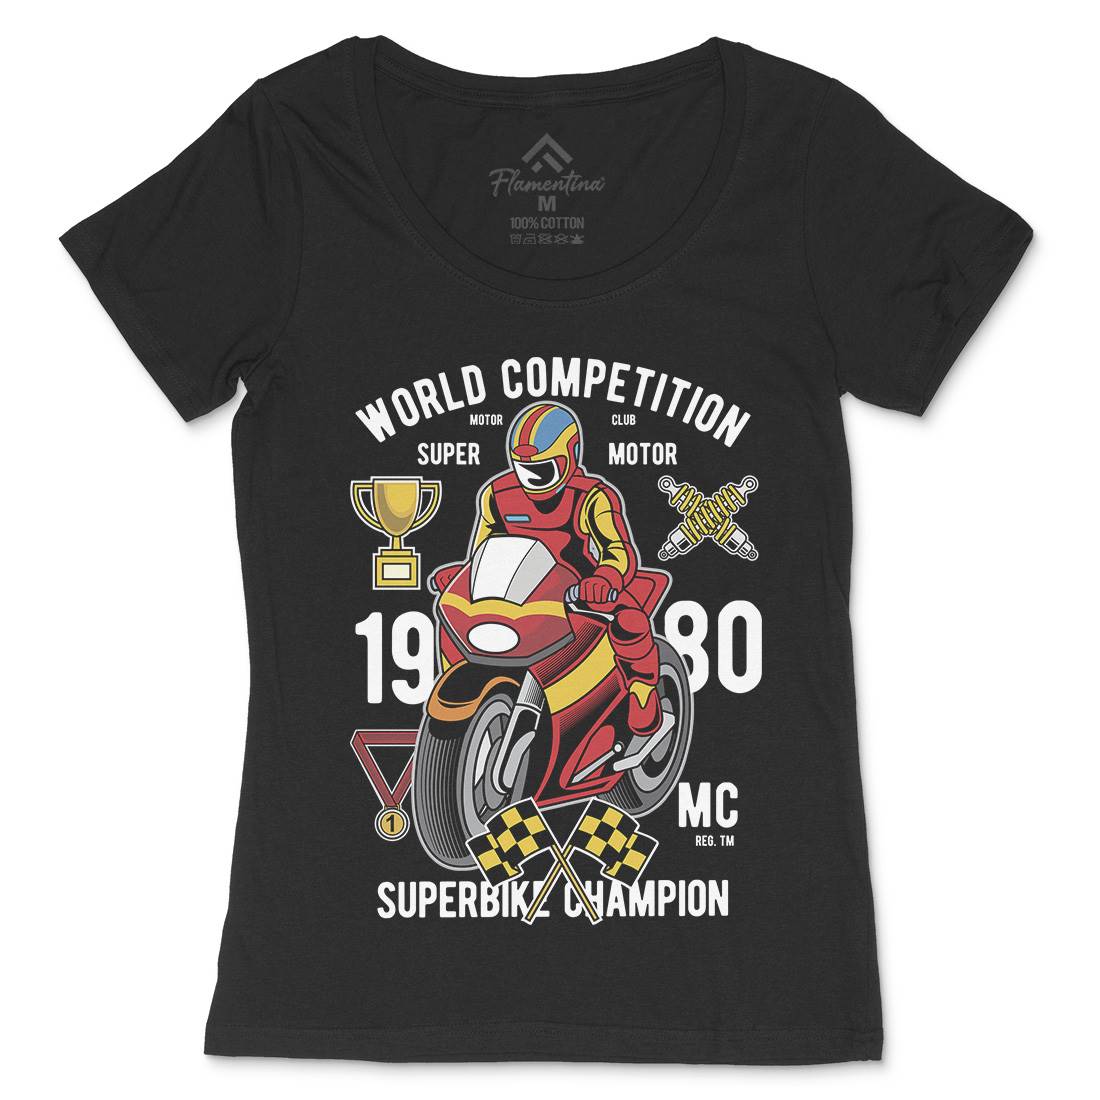 Super Bike World Competition Womens Scoop Neck T-Shirt Motorcycles C458